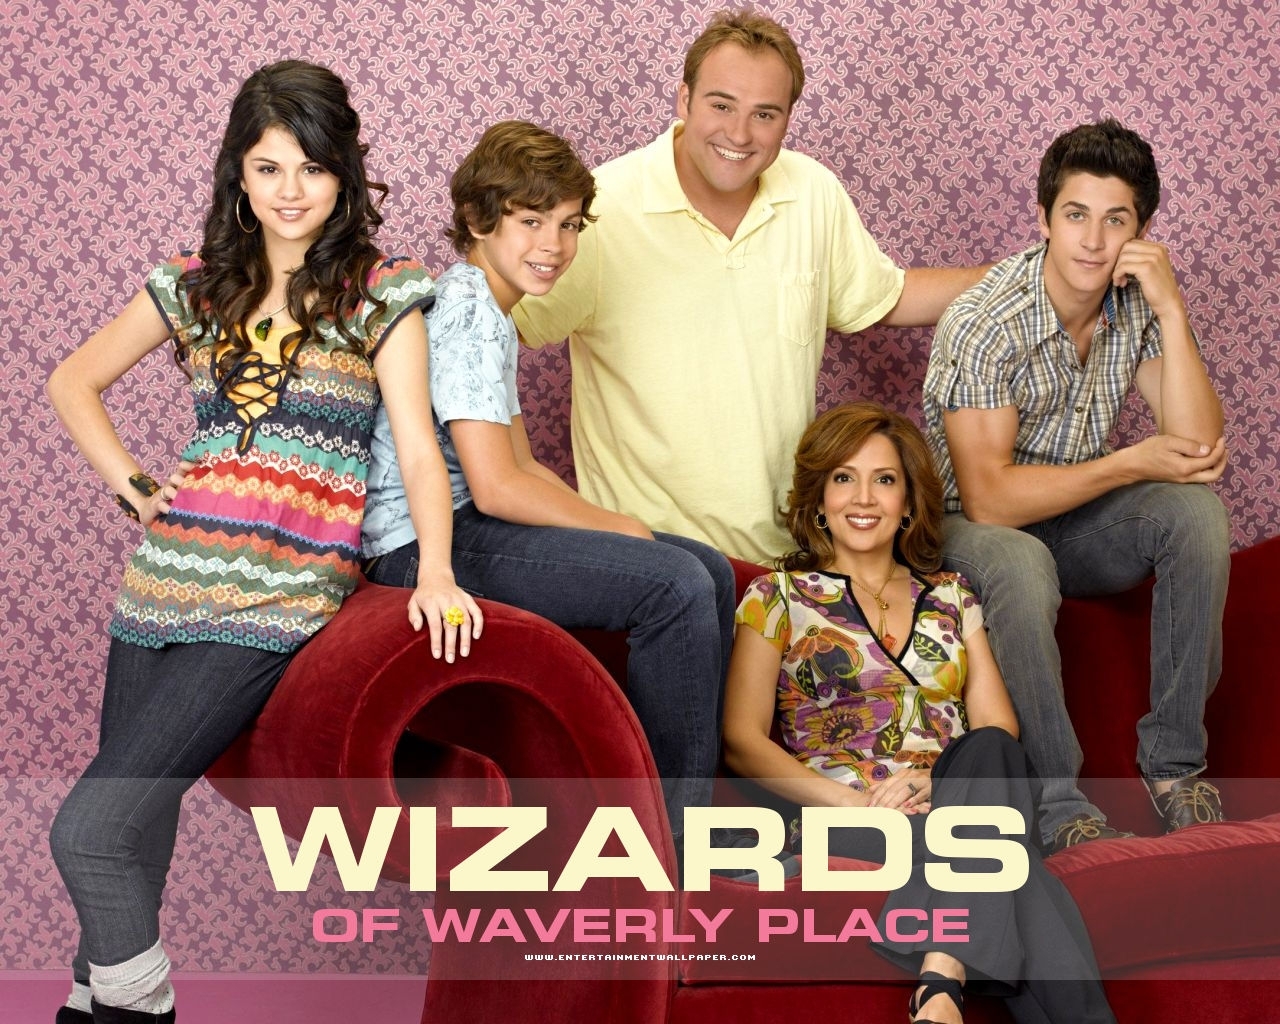 Pixart 24X7 ! Free Wallpapers: wizard of waverly place - wallpaper